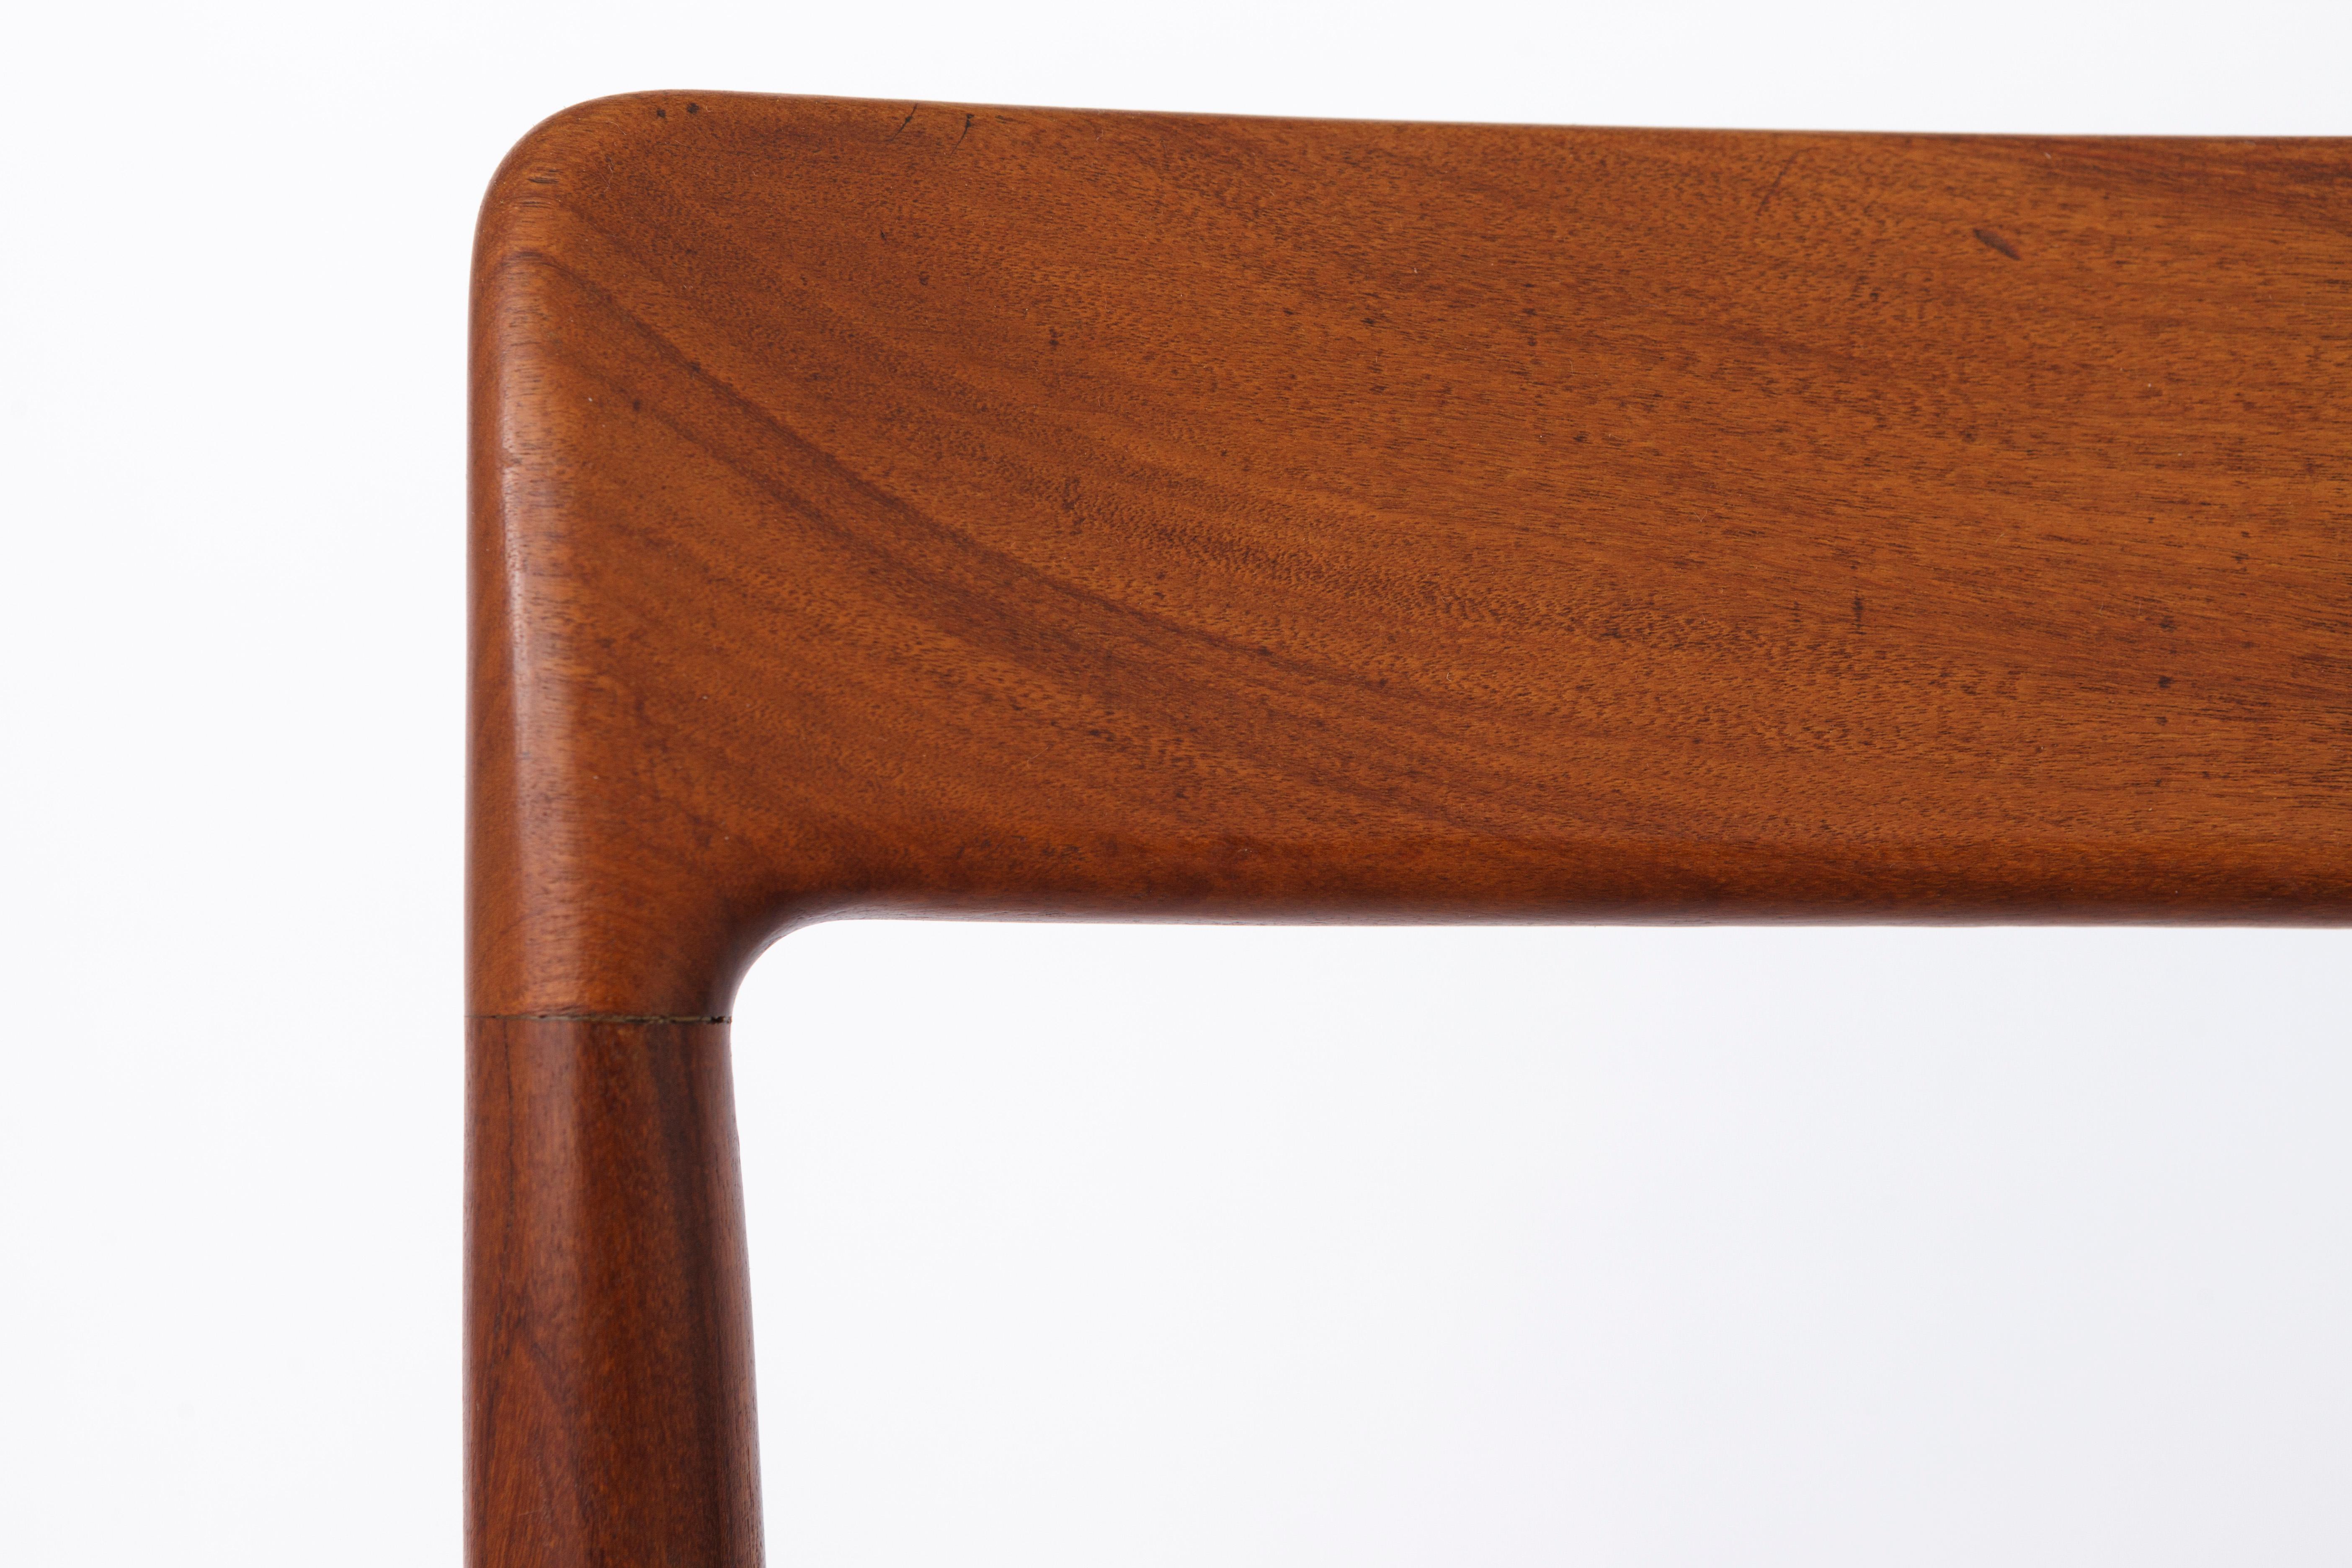 Vintage dining chair by manufacturer Lübke, Germany. 
Production period: 1960s-1970s. 

Sturdy teak wood frame. Refurbished and oiled. 
Repholstered seat cover. 
The photos give pretty well the real condition of the chair. 